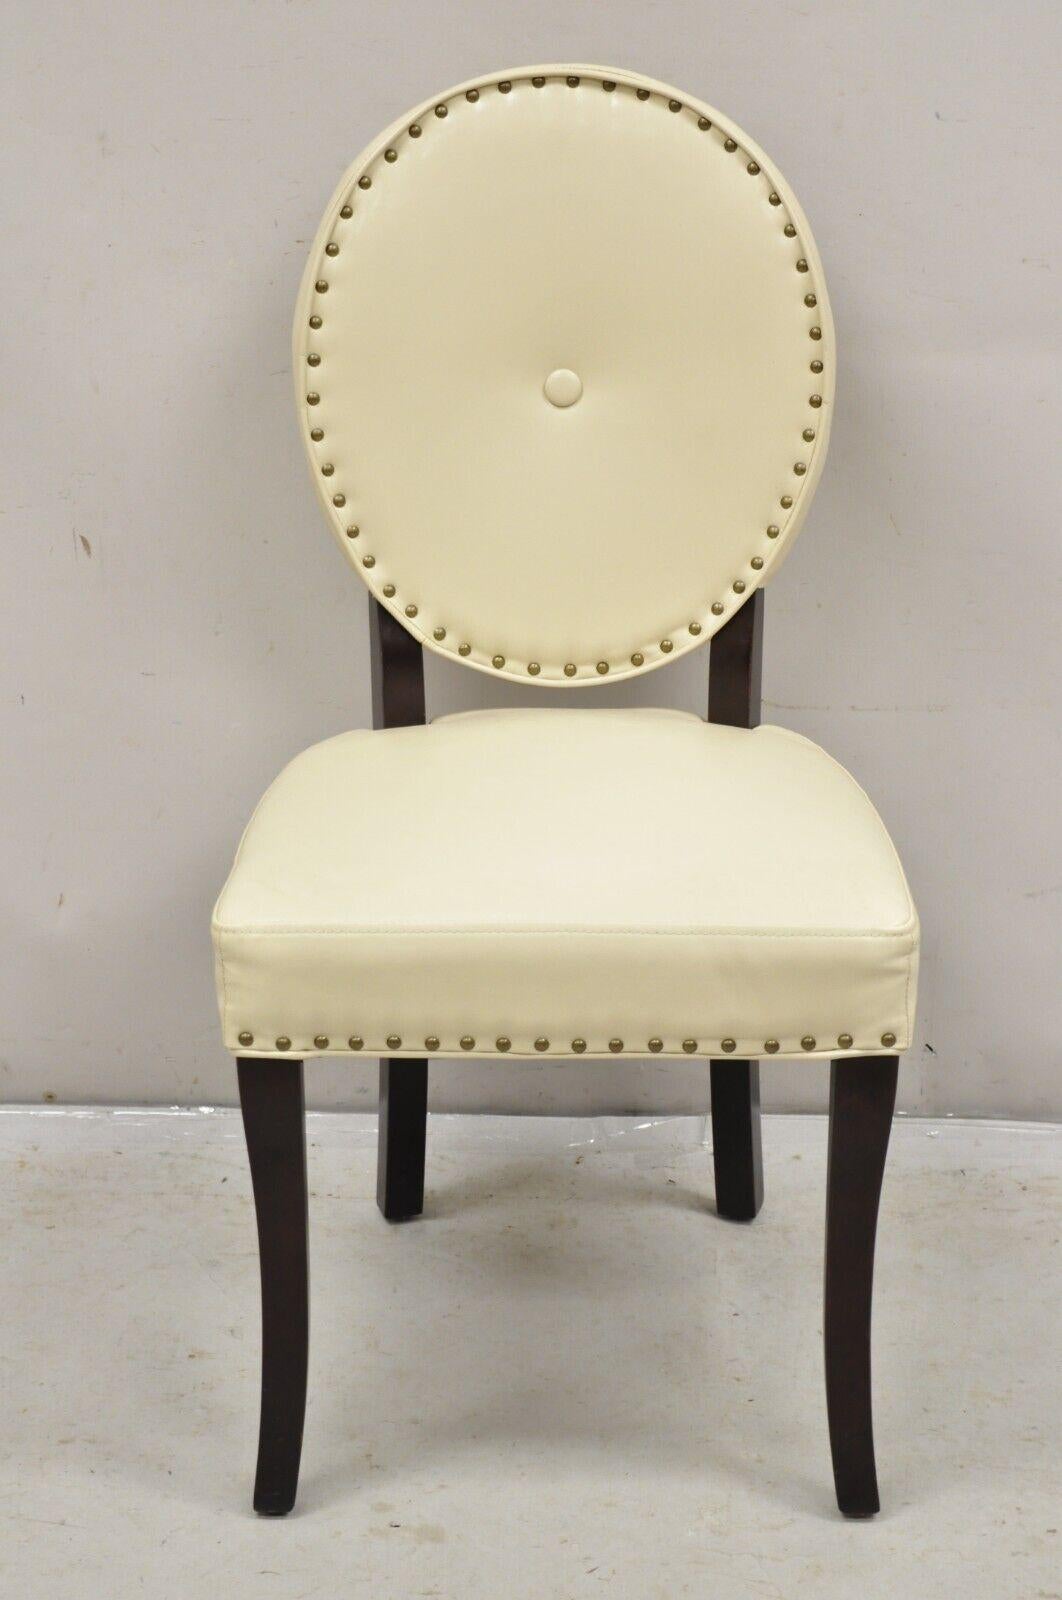 Pier 1 Imports Cadence Ivory Nailhead Oval Back Dining Chairs - Set of 6 Side Chairs. Item features dark cherry finish wooden legs, original labels, beige bonded leather upholstery (see label), very nice set.  21st Century, Pre-owned. Measurements: